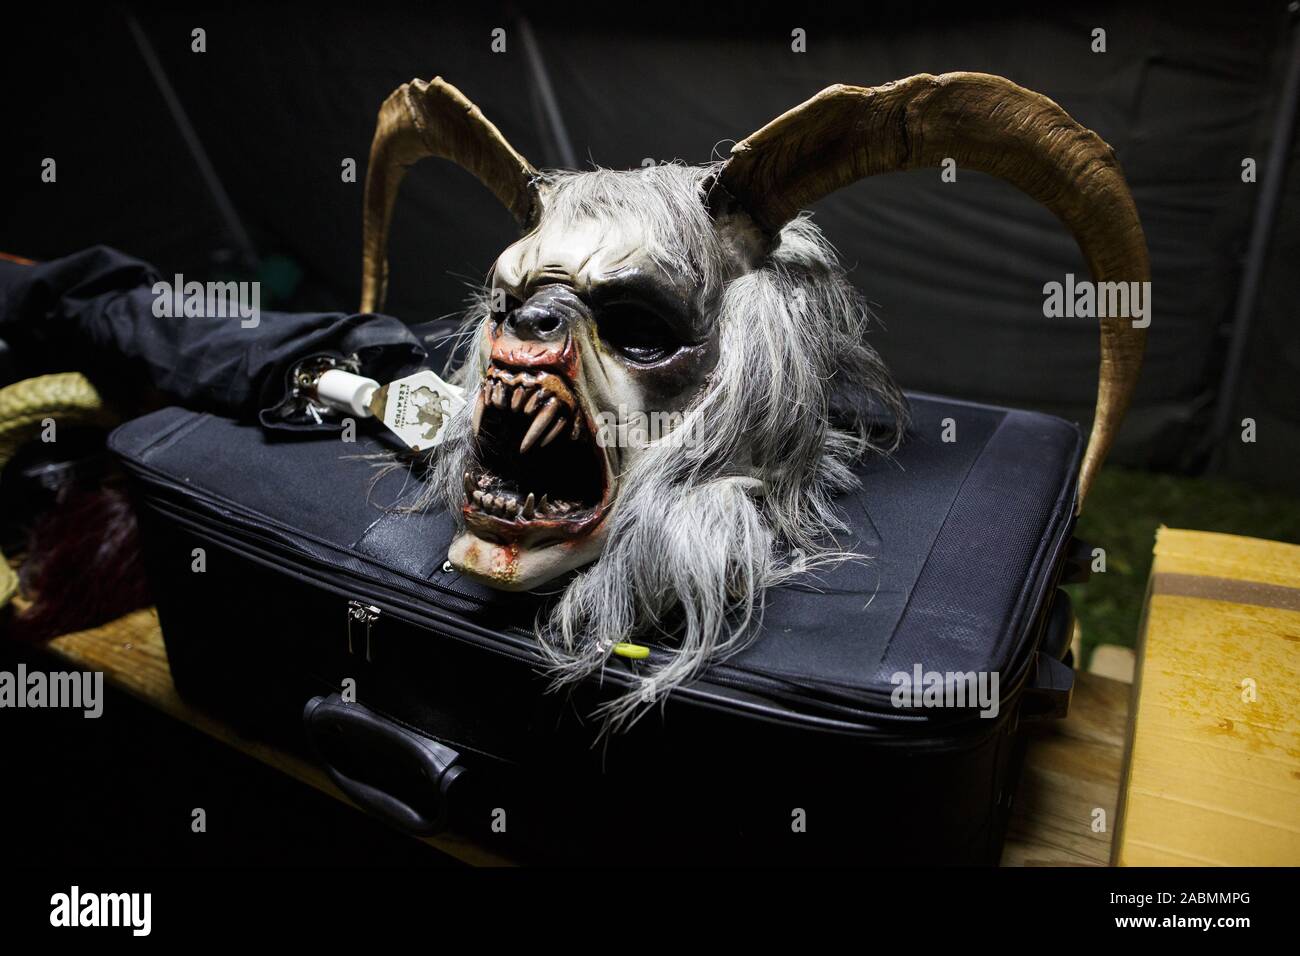 Goričane, Slovenia, November 21, 2015: A Krampus mask is seen in a dressing  tent of the annual Krampus Night event in Goričane, Slovenia, where over  500 Krampusse from five countries gather for